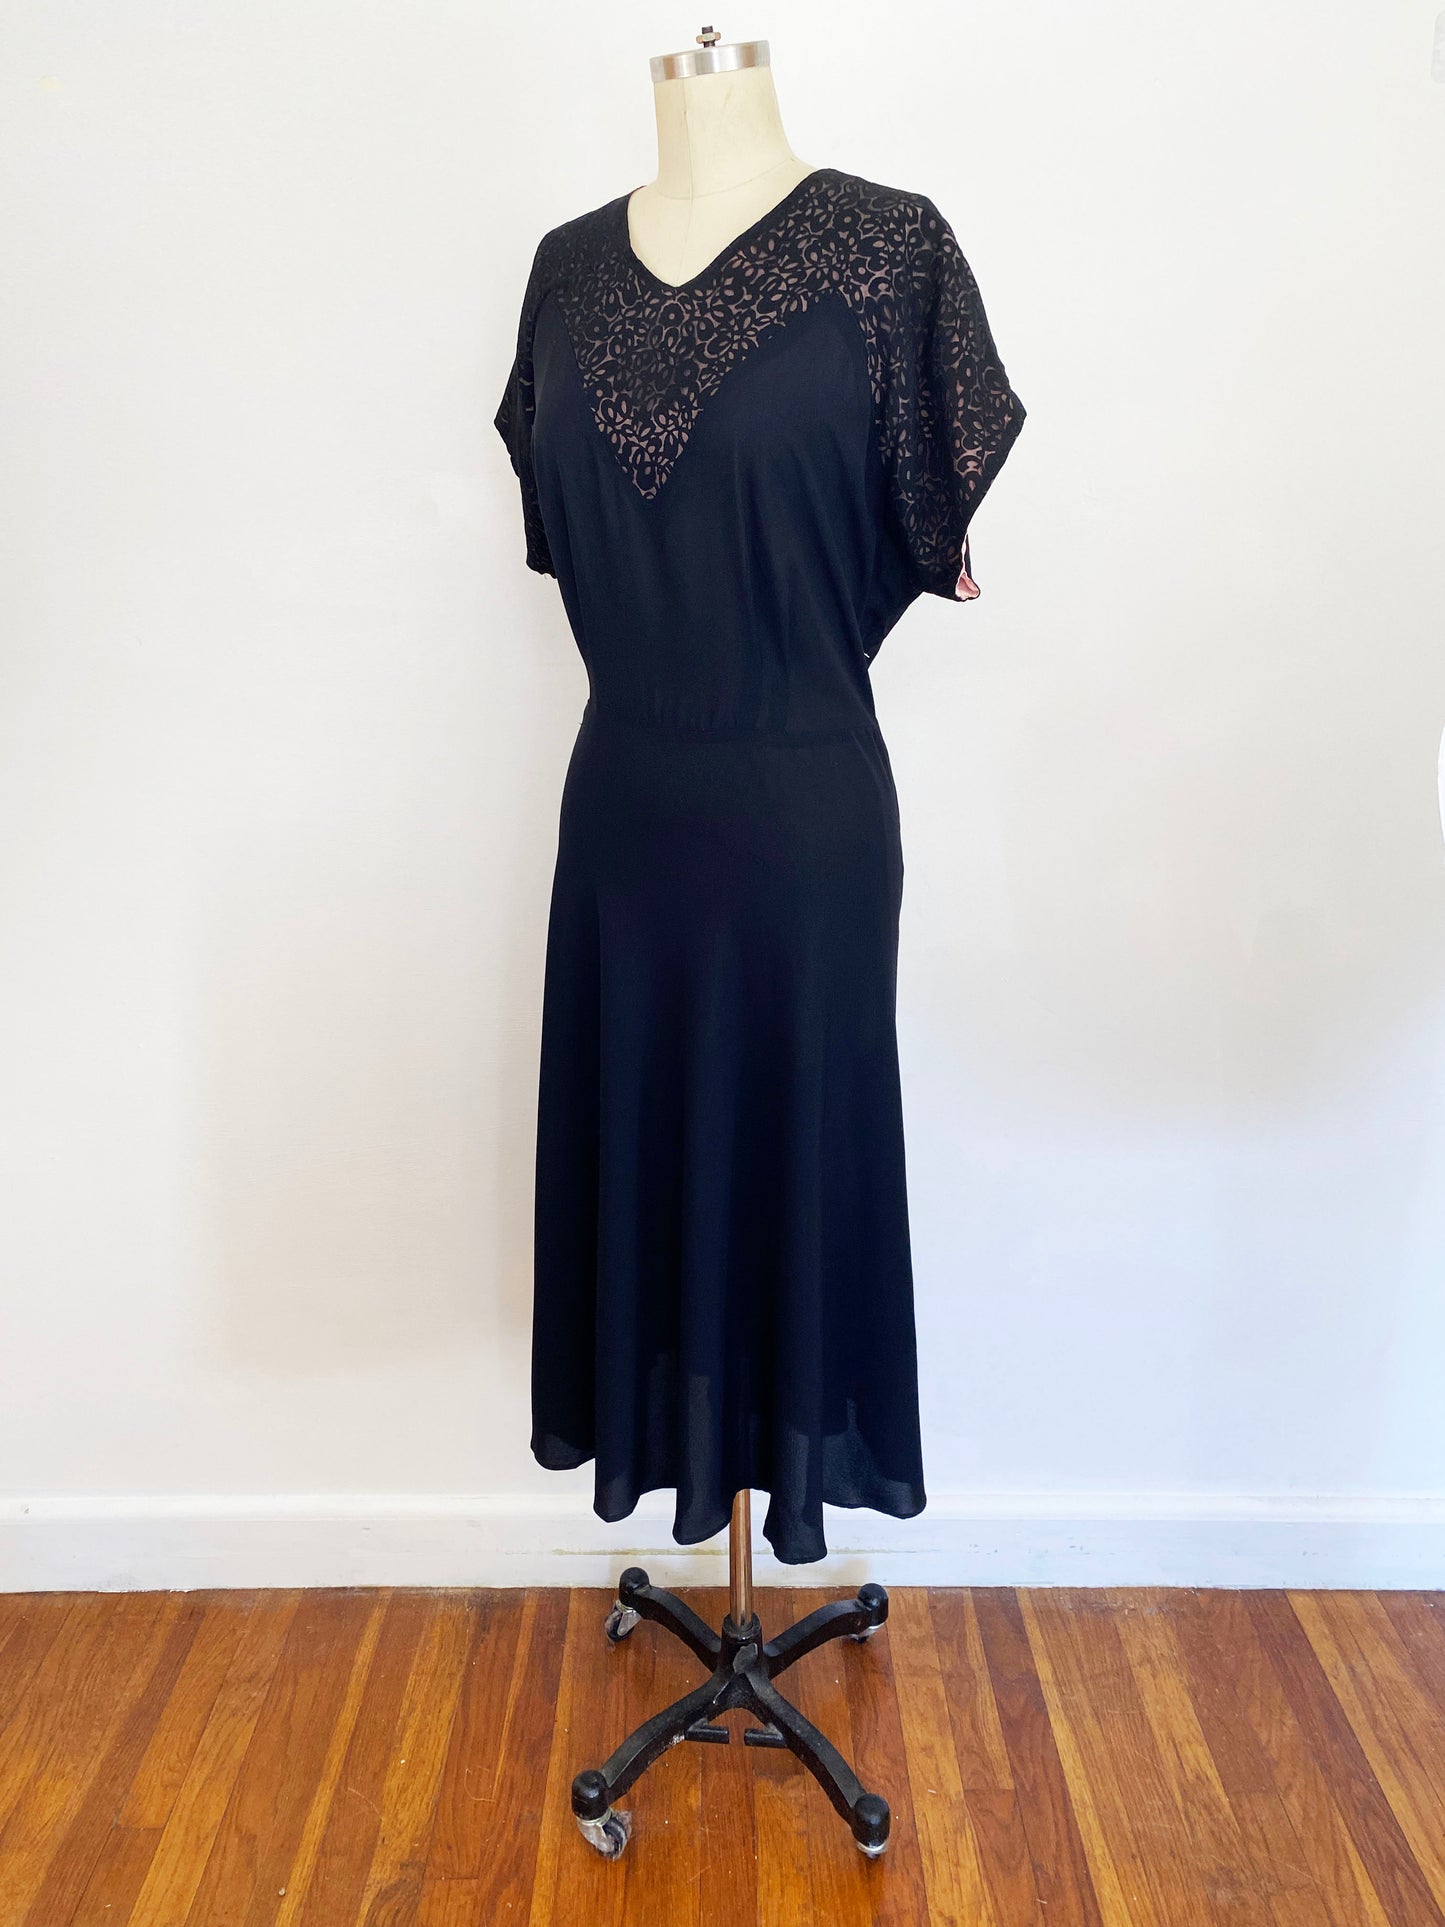 1940s Burn Out Illusion Neckline Black Rayon A-line Dress Goth Vamp Sexy Retro Gown 40s Plus Size / 1X 16/18